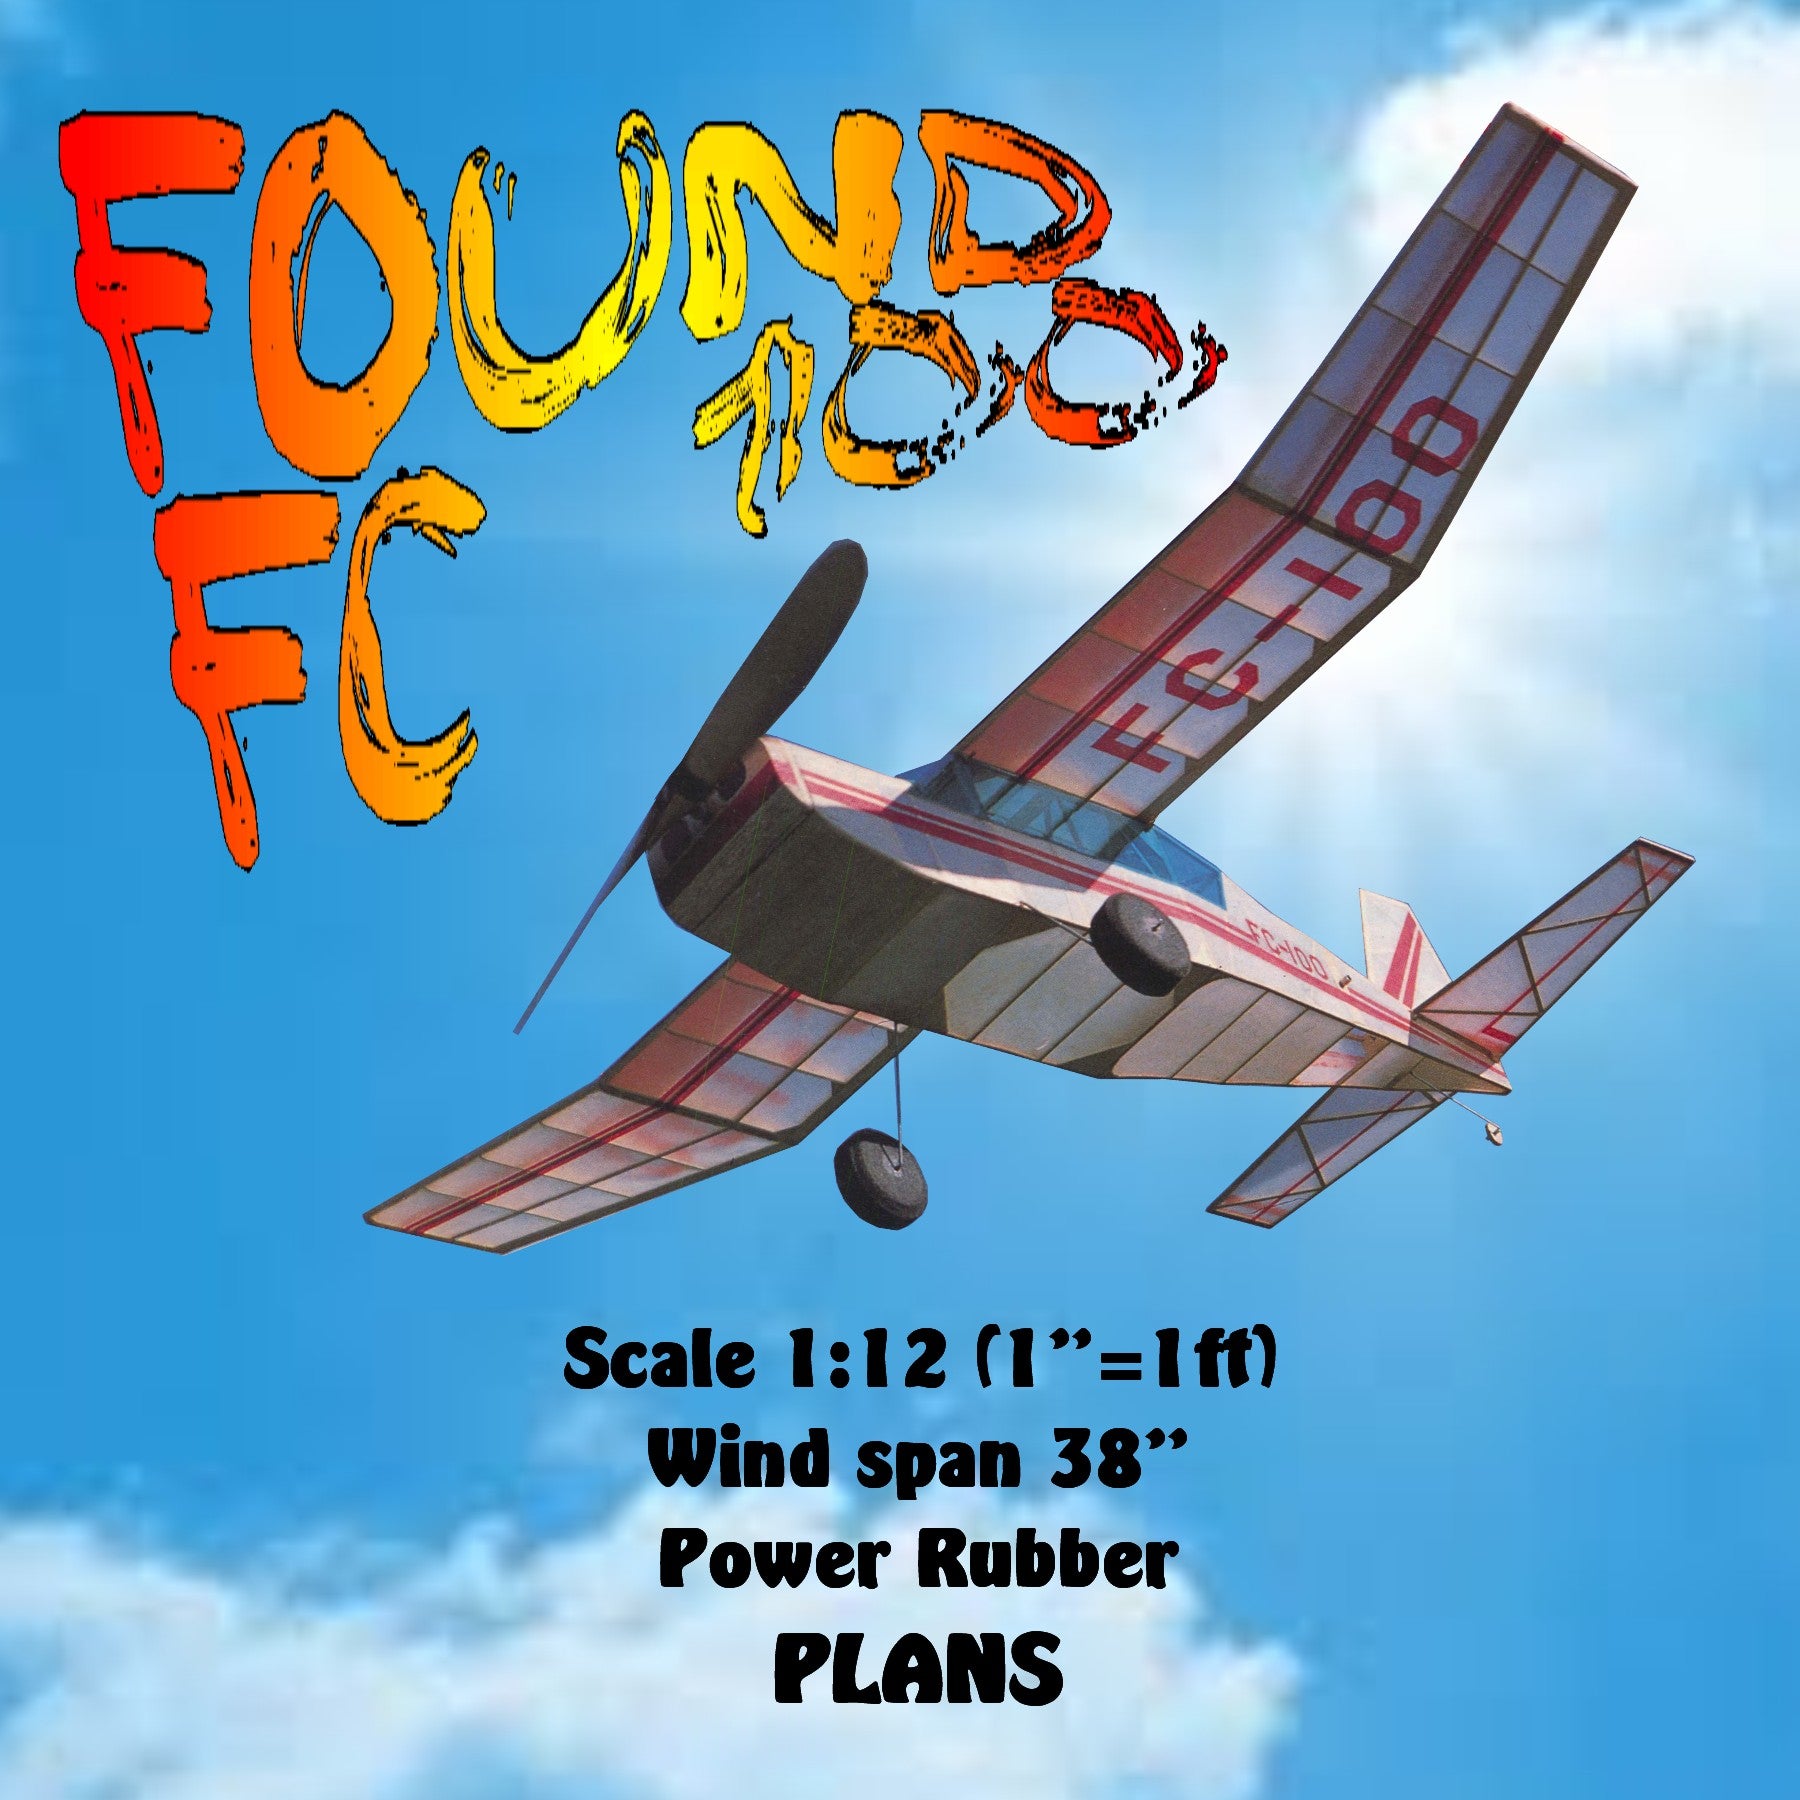 full size printed plan found fc 100 scale 1:12 (1”=1ft)  wind span 38”  power rubber